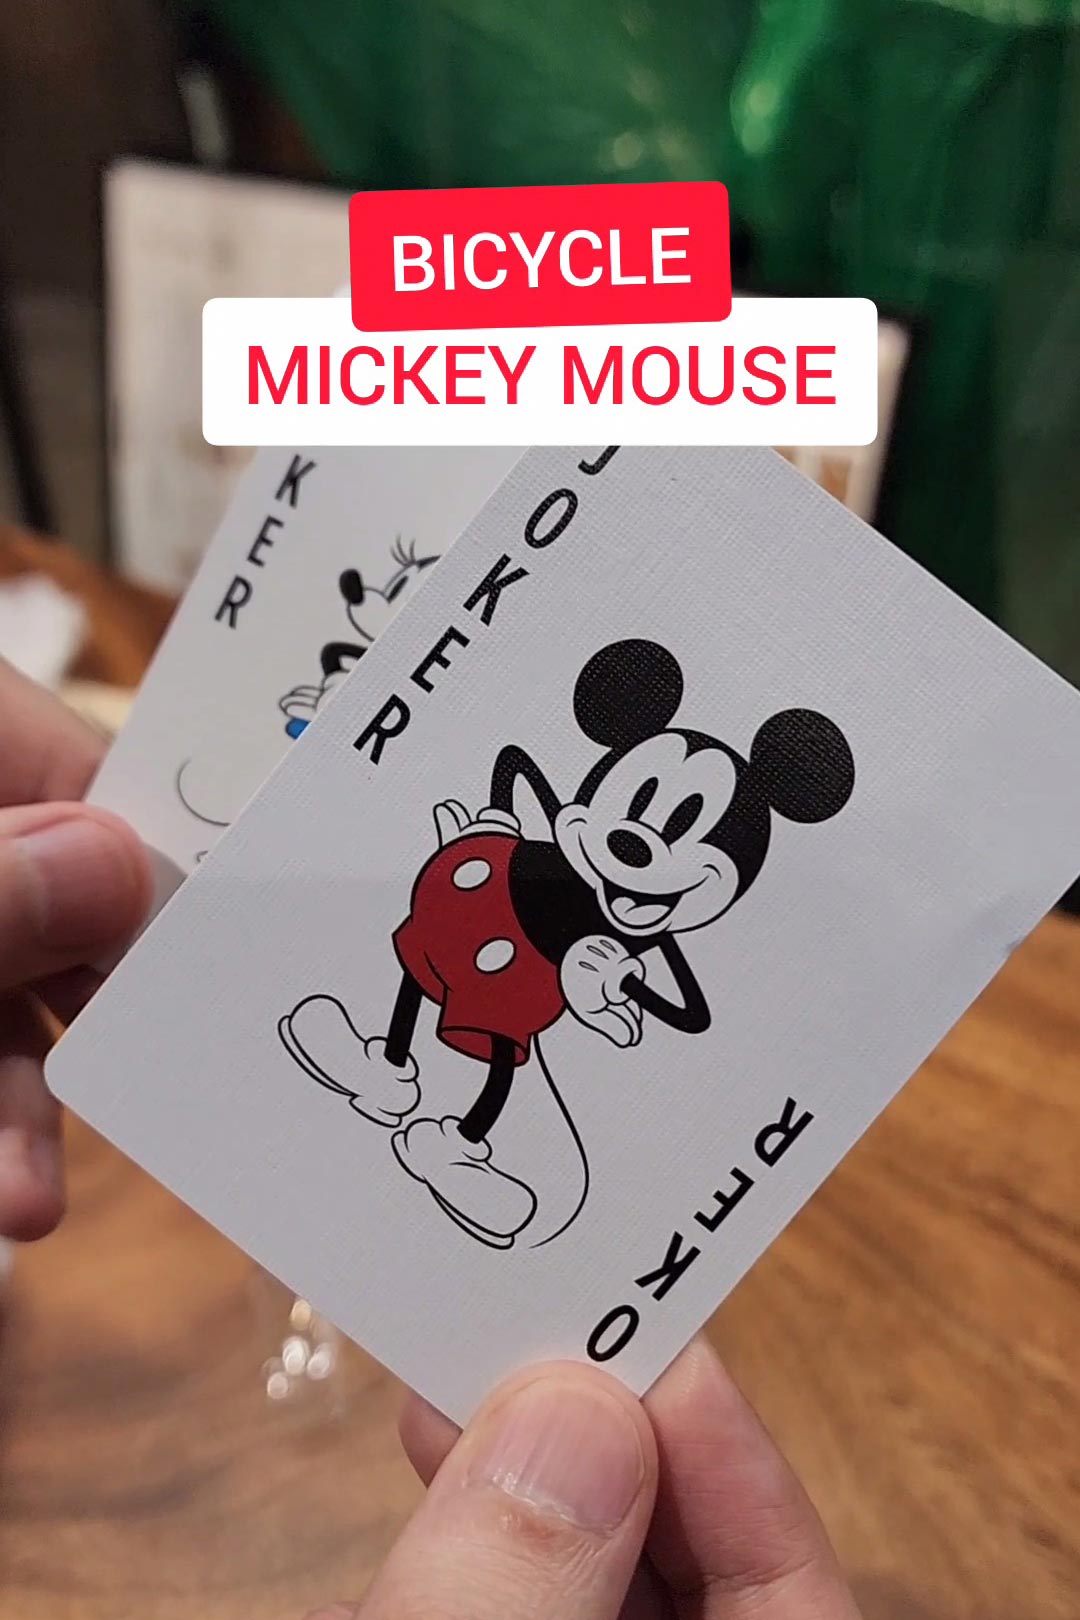 Bicycle Classic Mickey Mouse Playing Cards